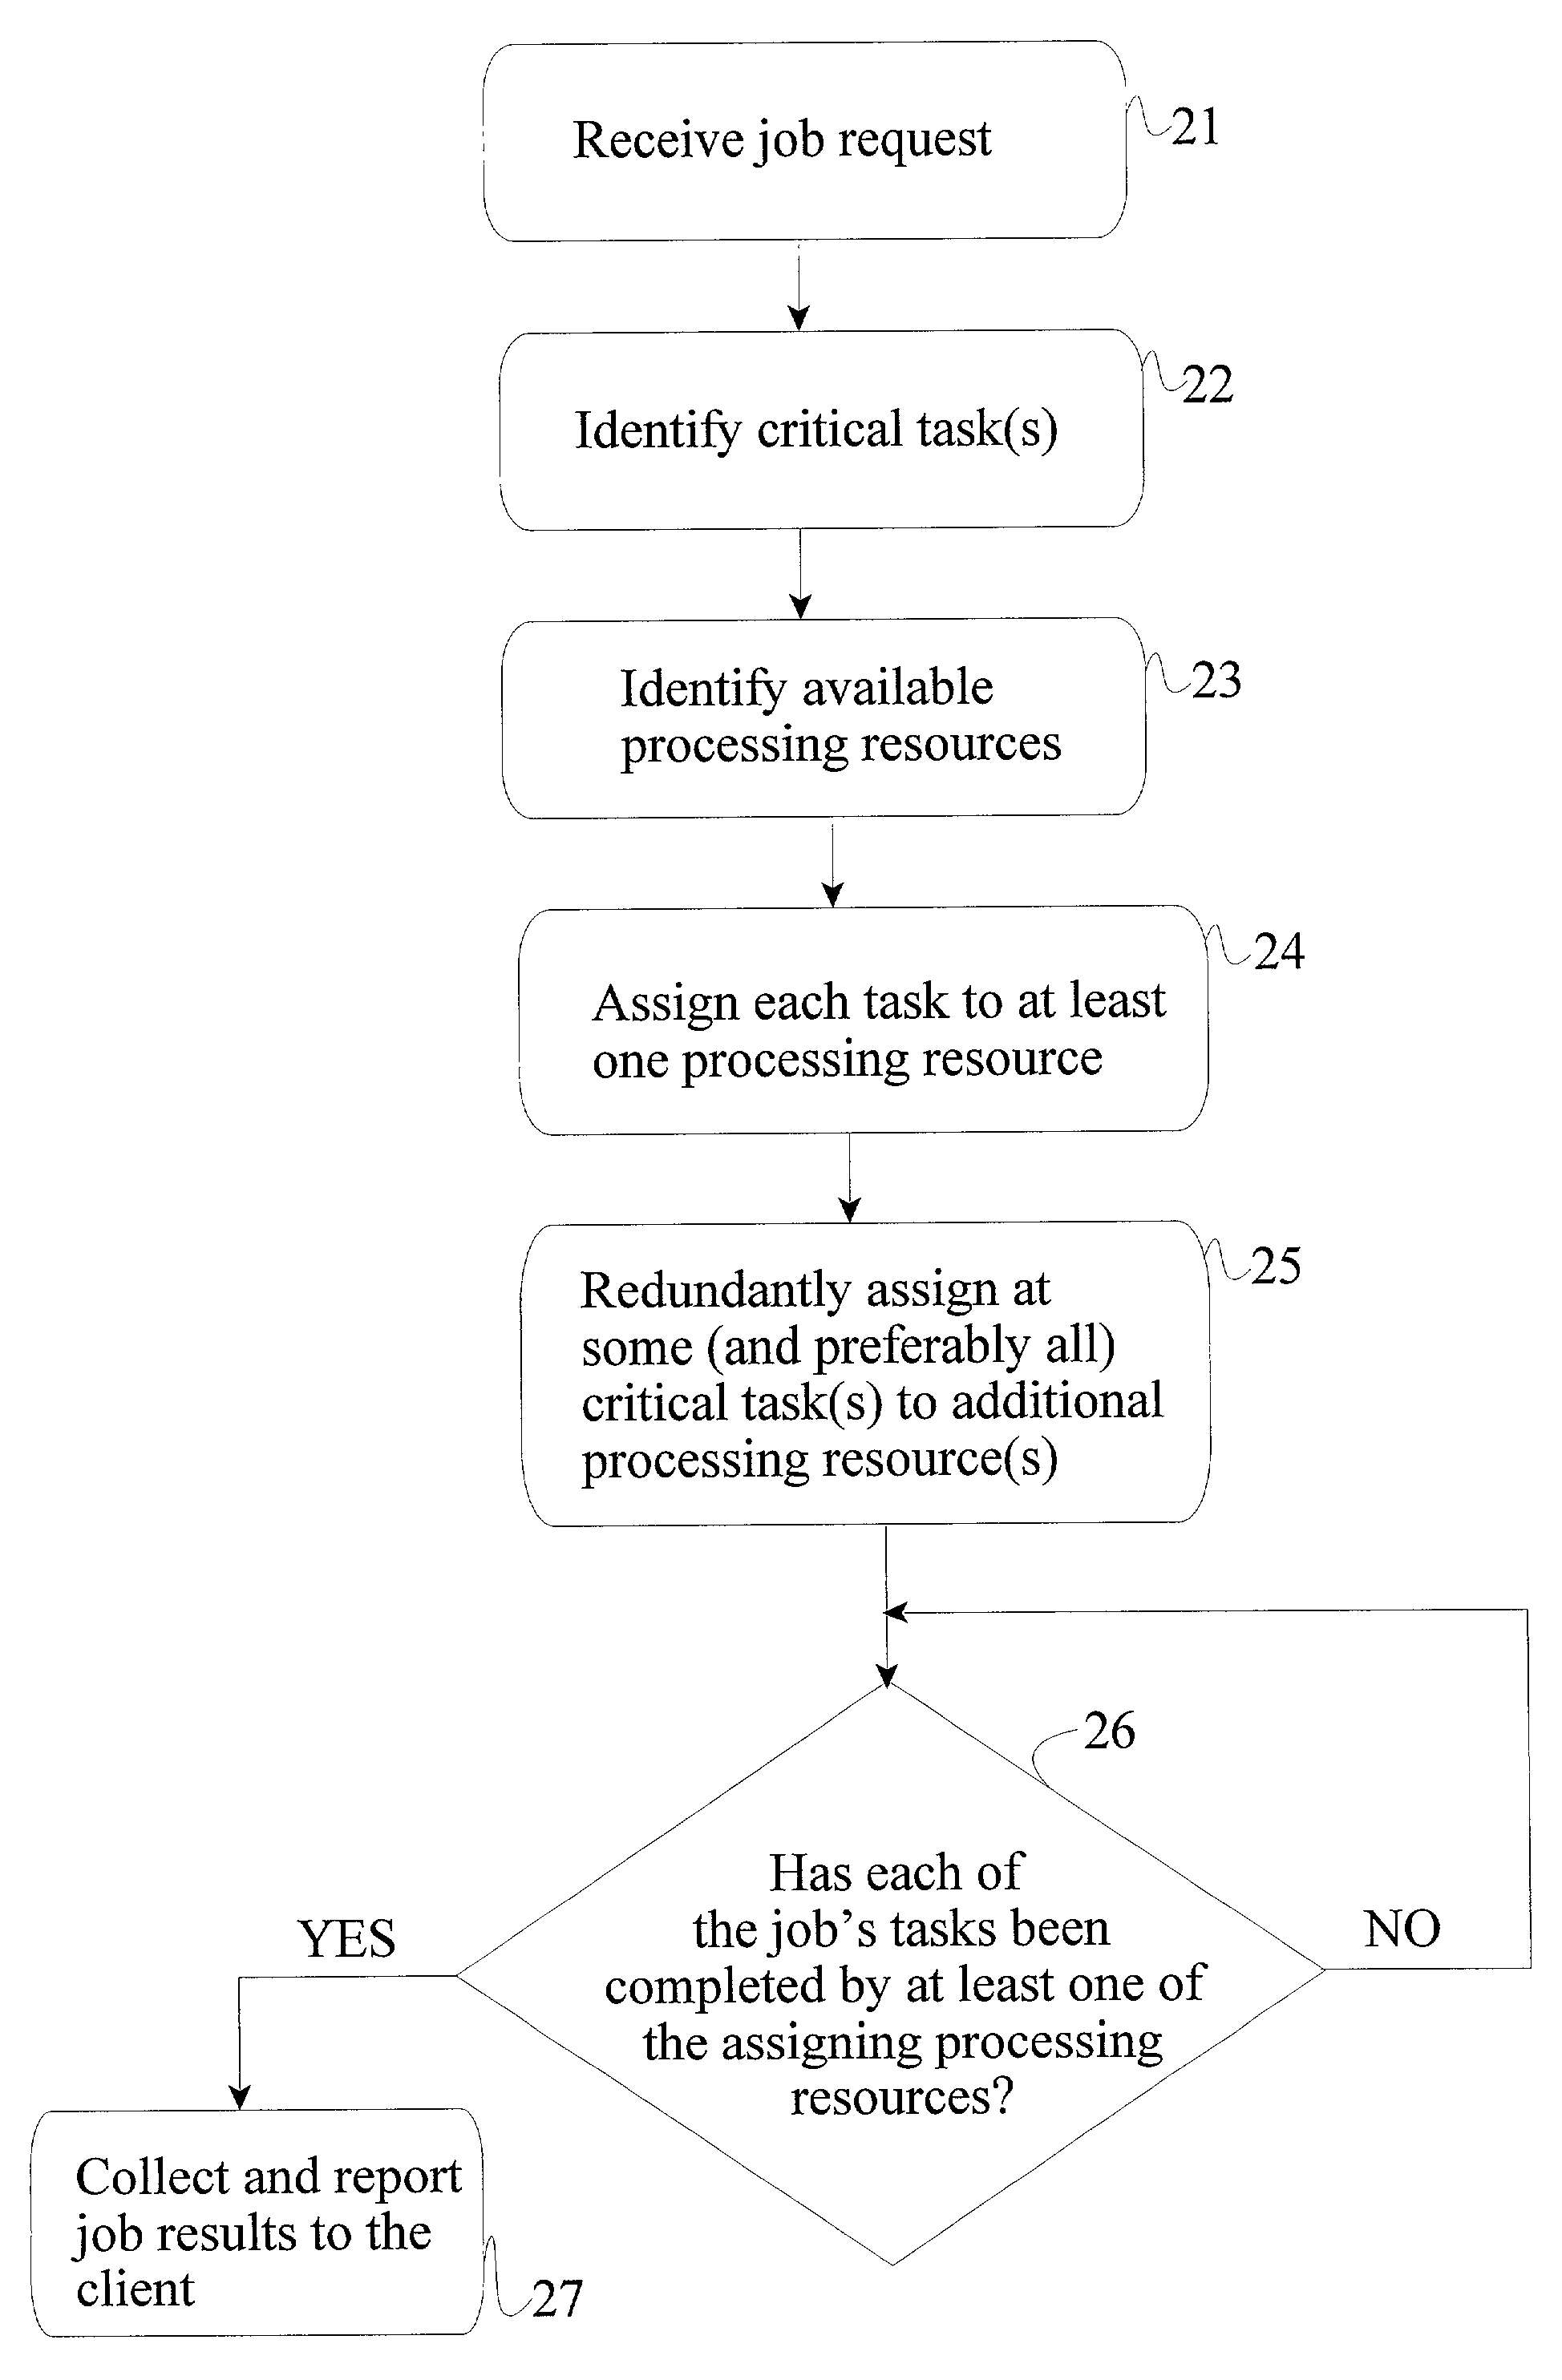 Redundancy-based methods, apparatus and articles-of-manufacture for providing improved quality-of-service in an always-live distributed computing environment